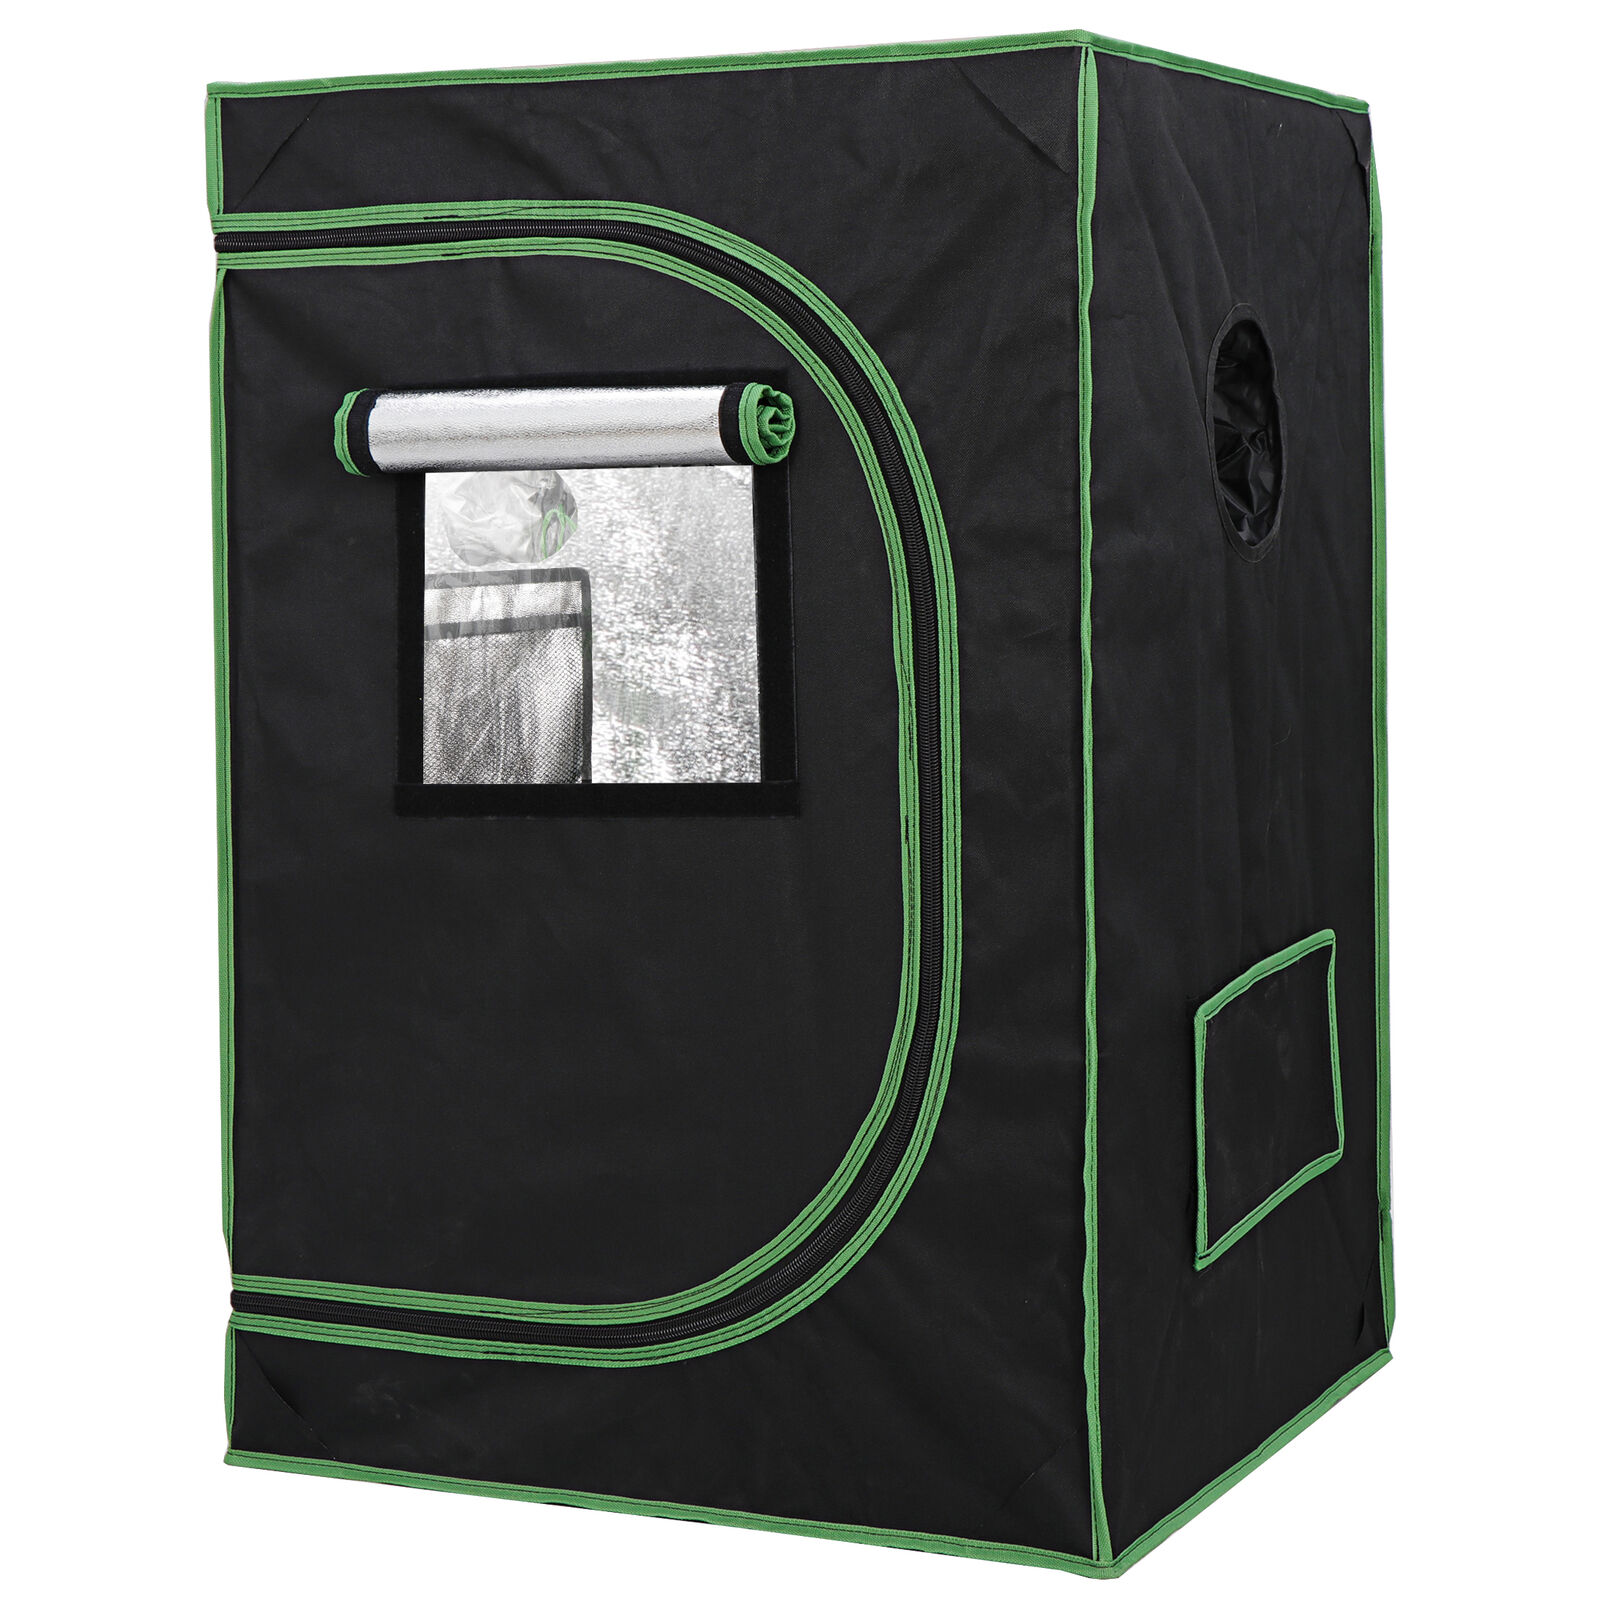 Hydroponic Grow Tent with Observation Window and Floor Tray for Plant Growing 